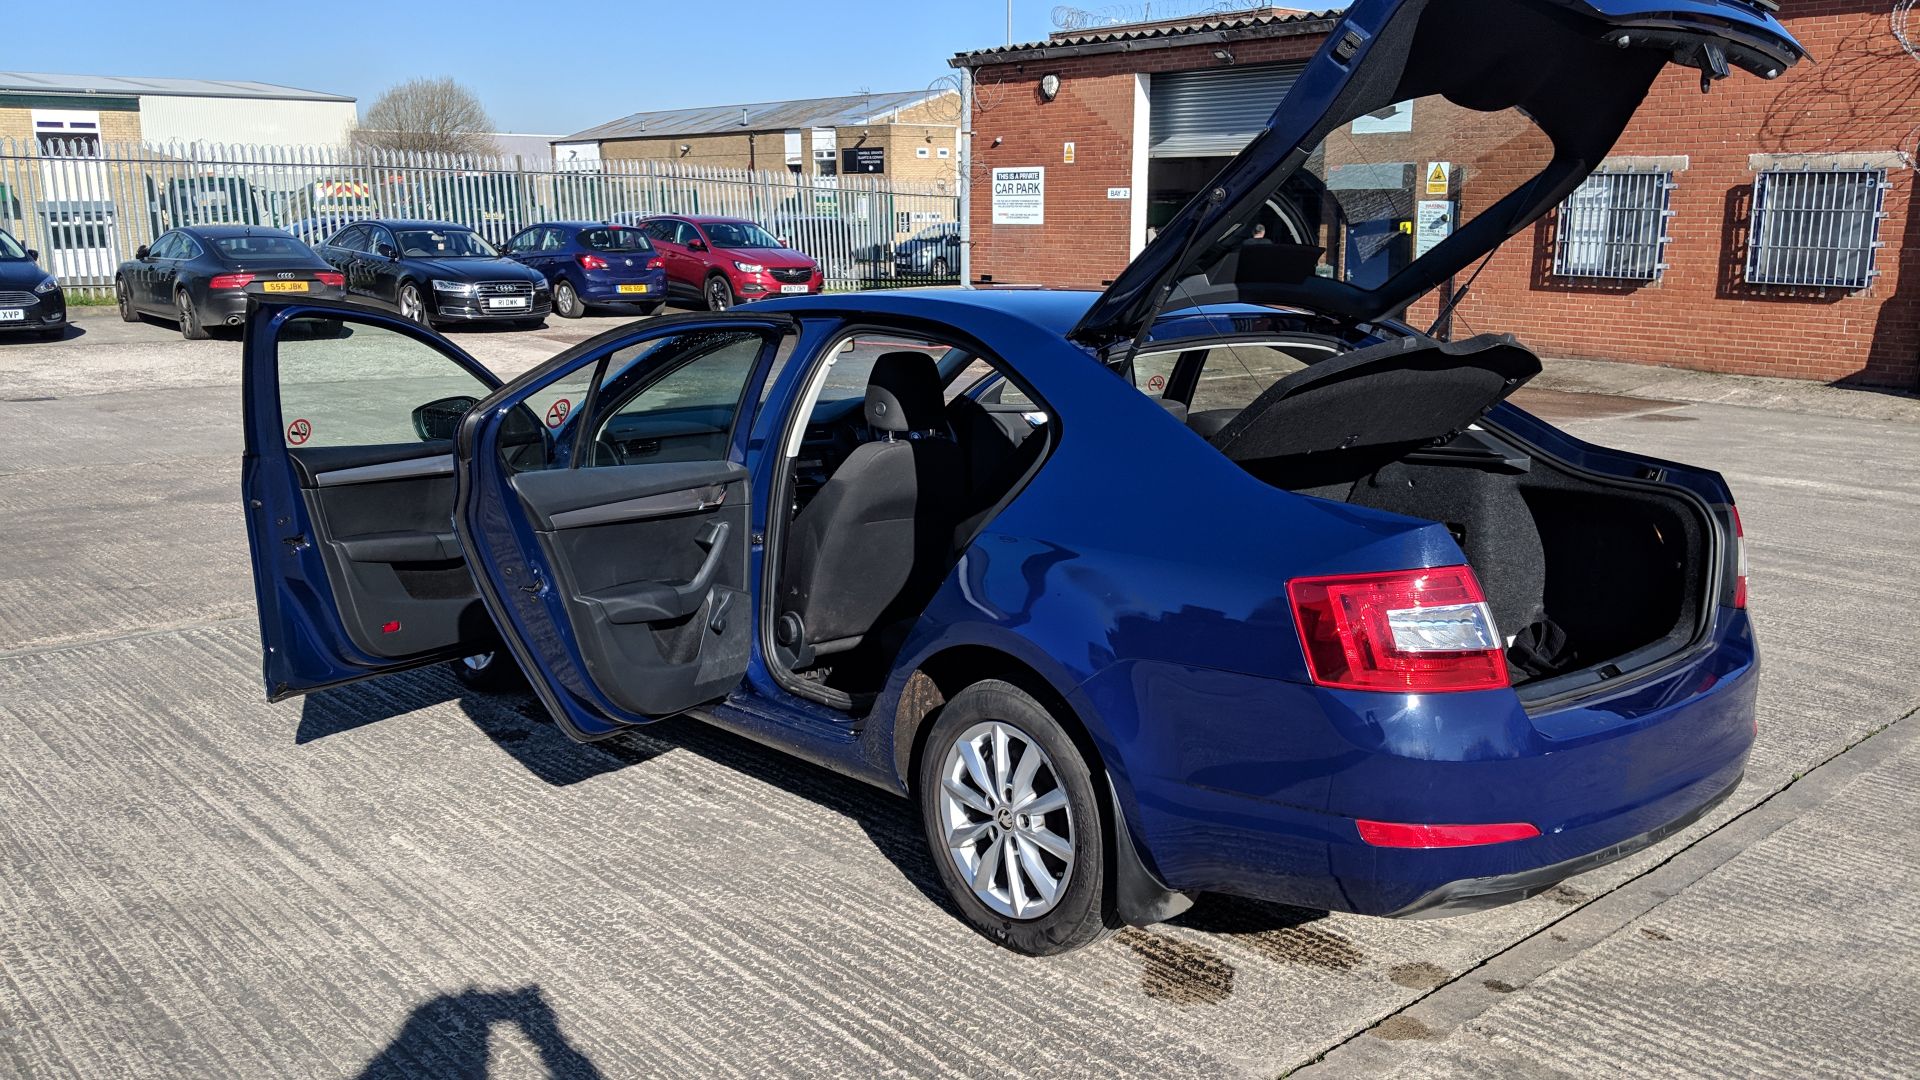 LC66 HWM Skoda Octavia S TDI S-A 1598cc diesel engine. Colour: Blue. First registered: 06.02.17. - Image 8 of 58